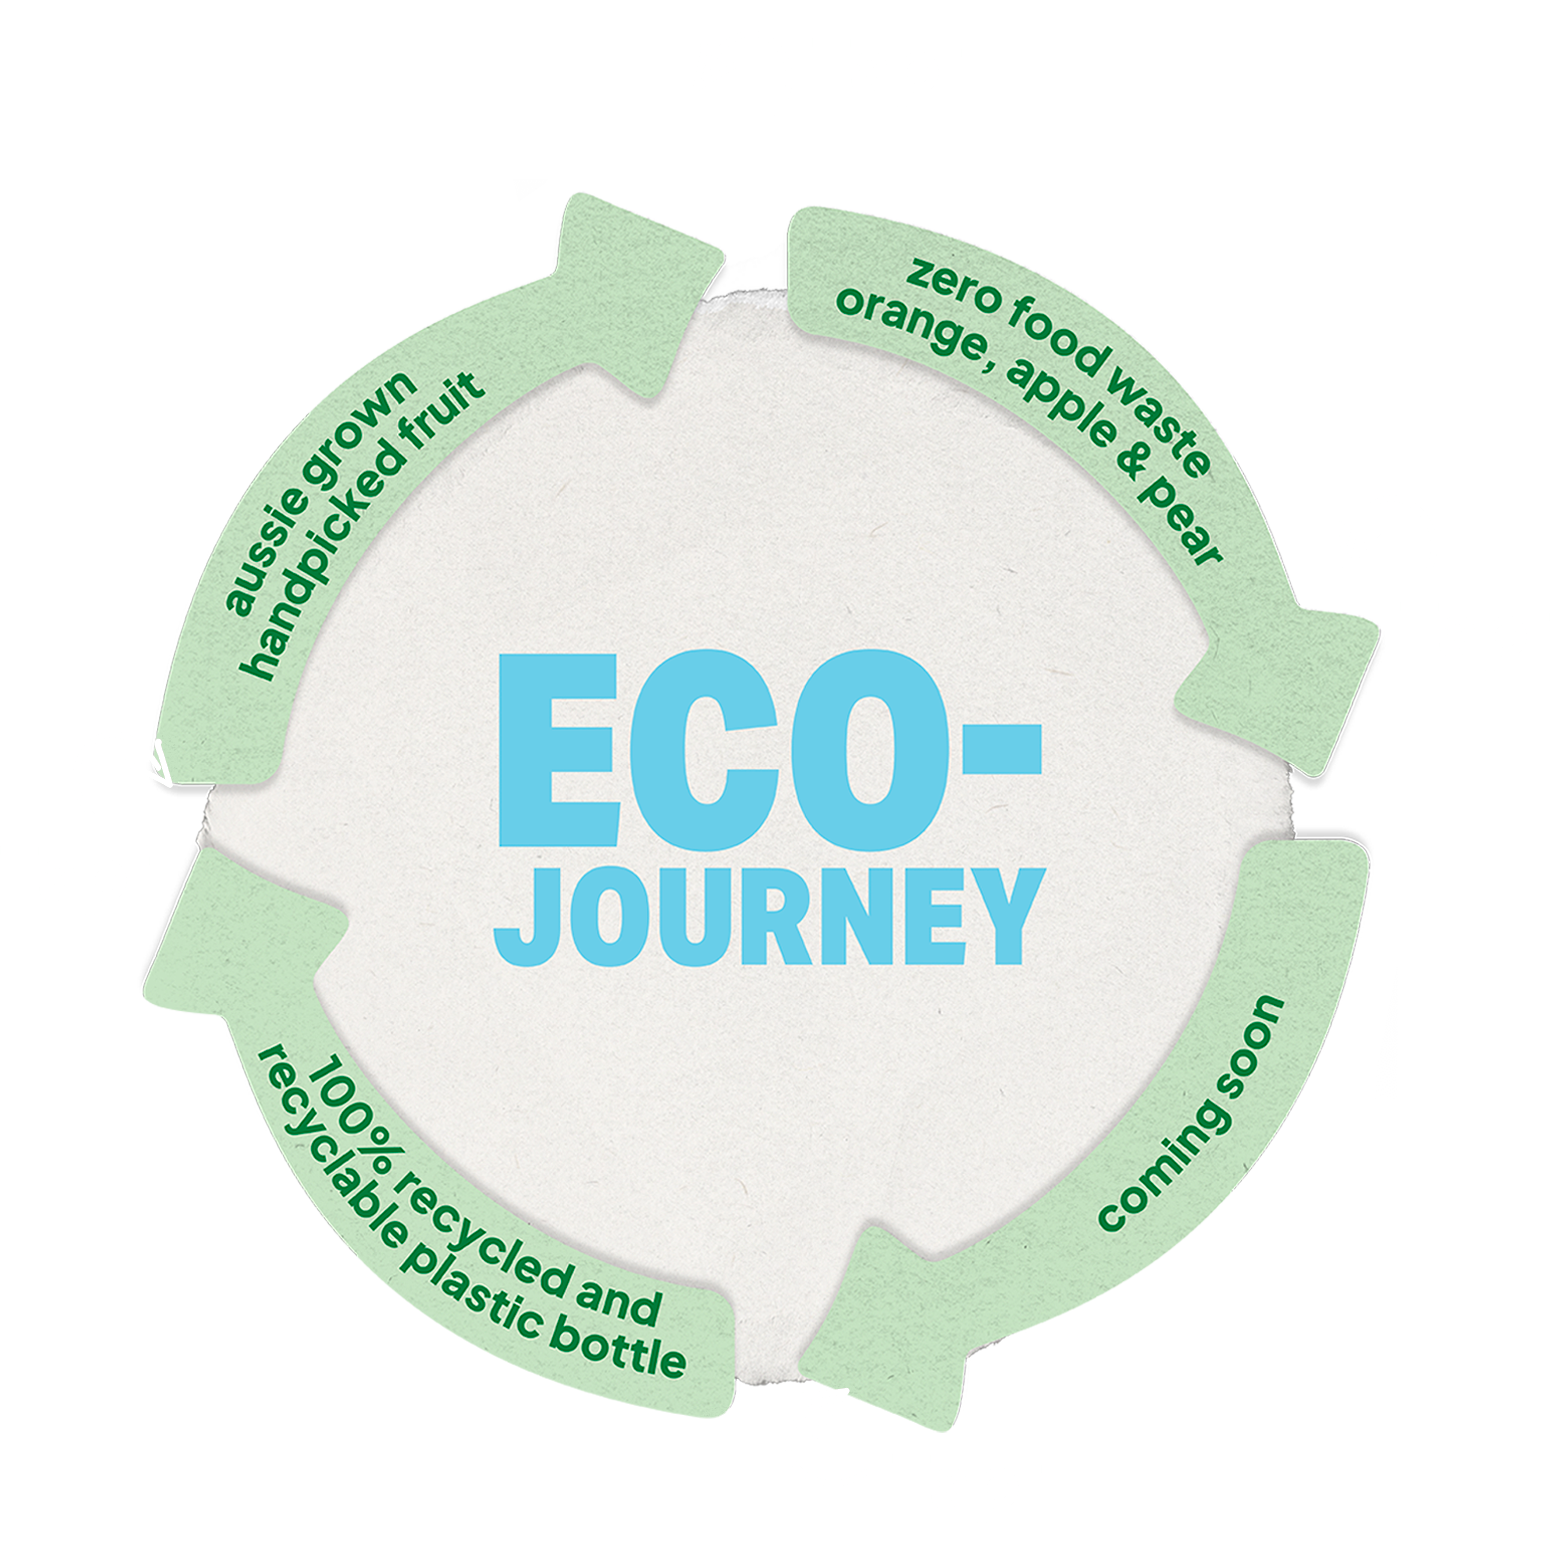 Our eco-journey – Aussie grown handpicked fruit, zero food waste, 100% recycled and recyclable bottle.